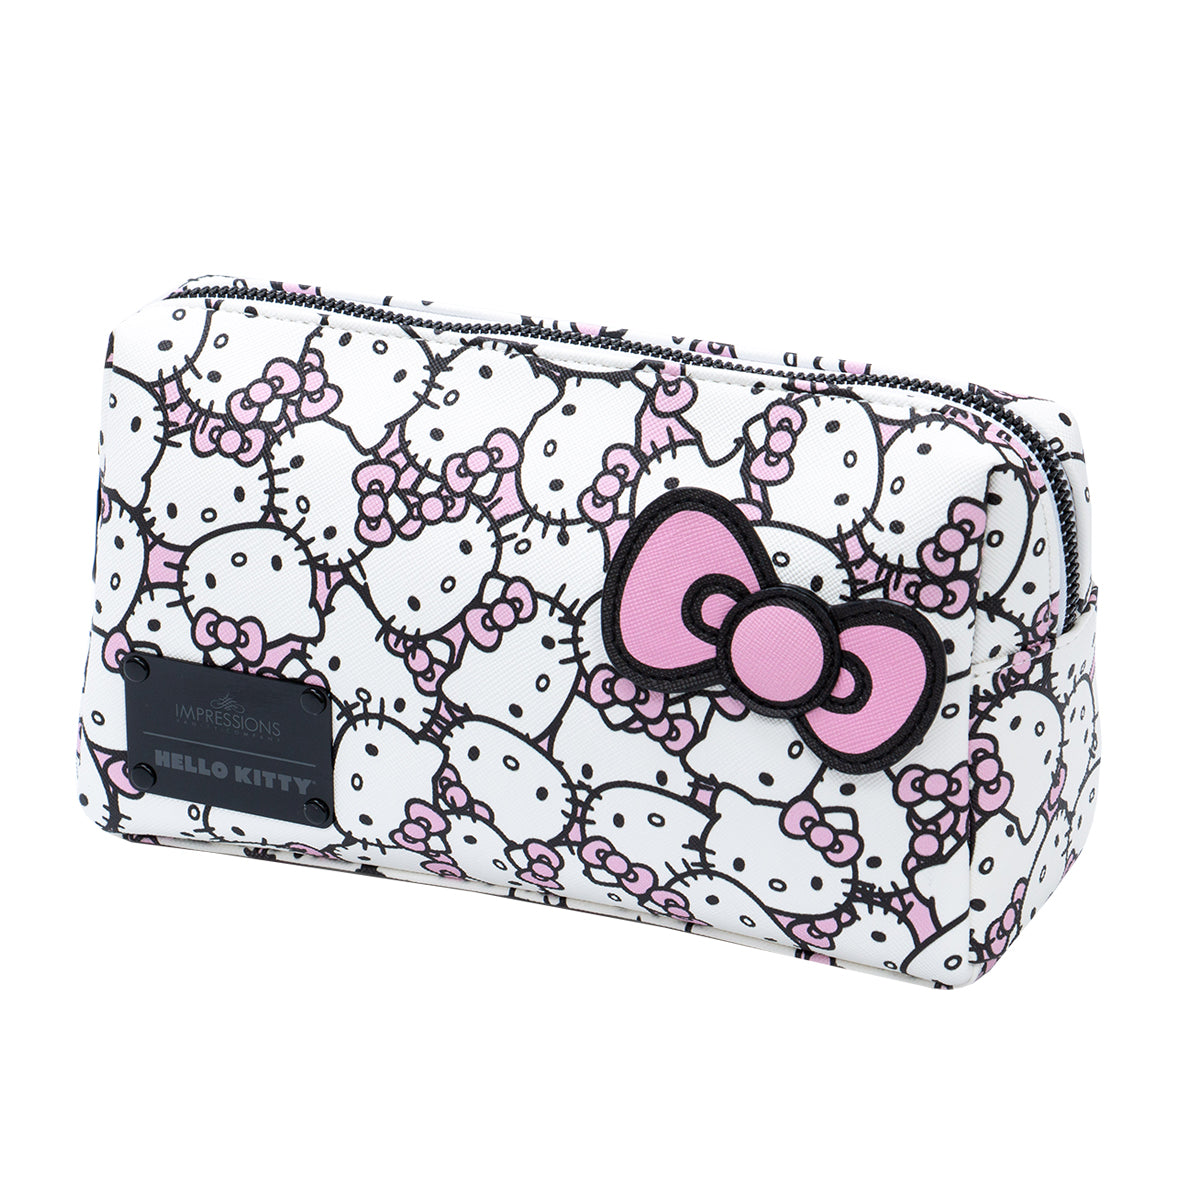 Pink Makeup Pouch / Makeup Bag / Daily Pouch / Cosmetics Pouch 